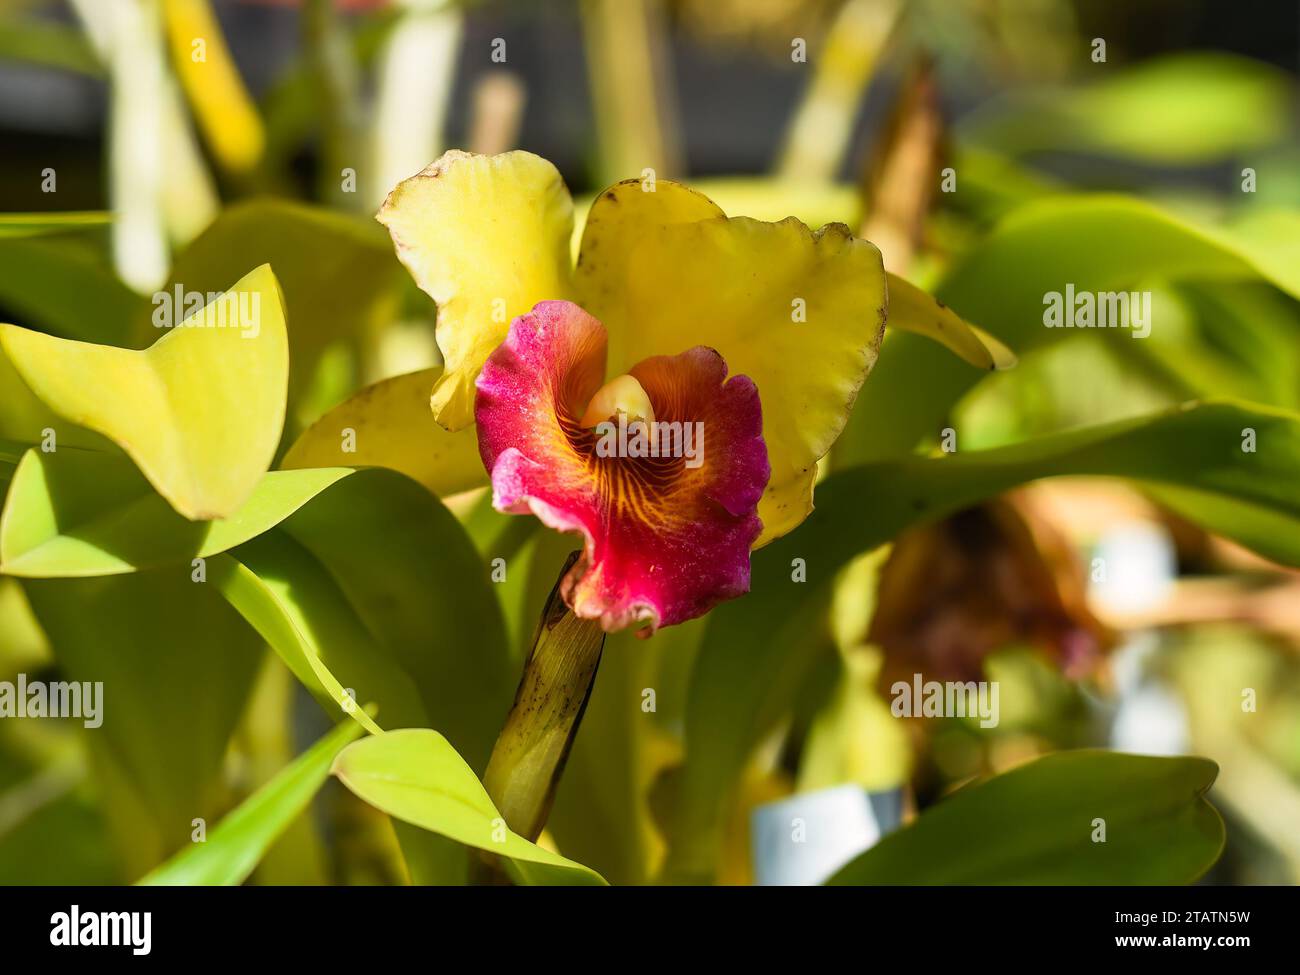 Rhyncholaeliocattleya Cheah Bean-Kee orchid close up Stock Photo